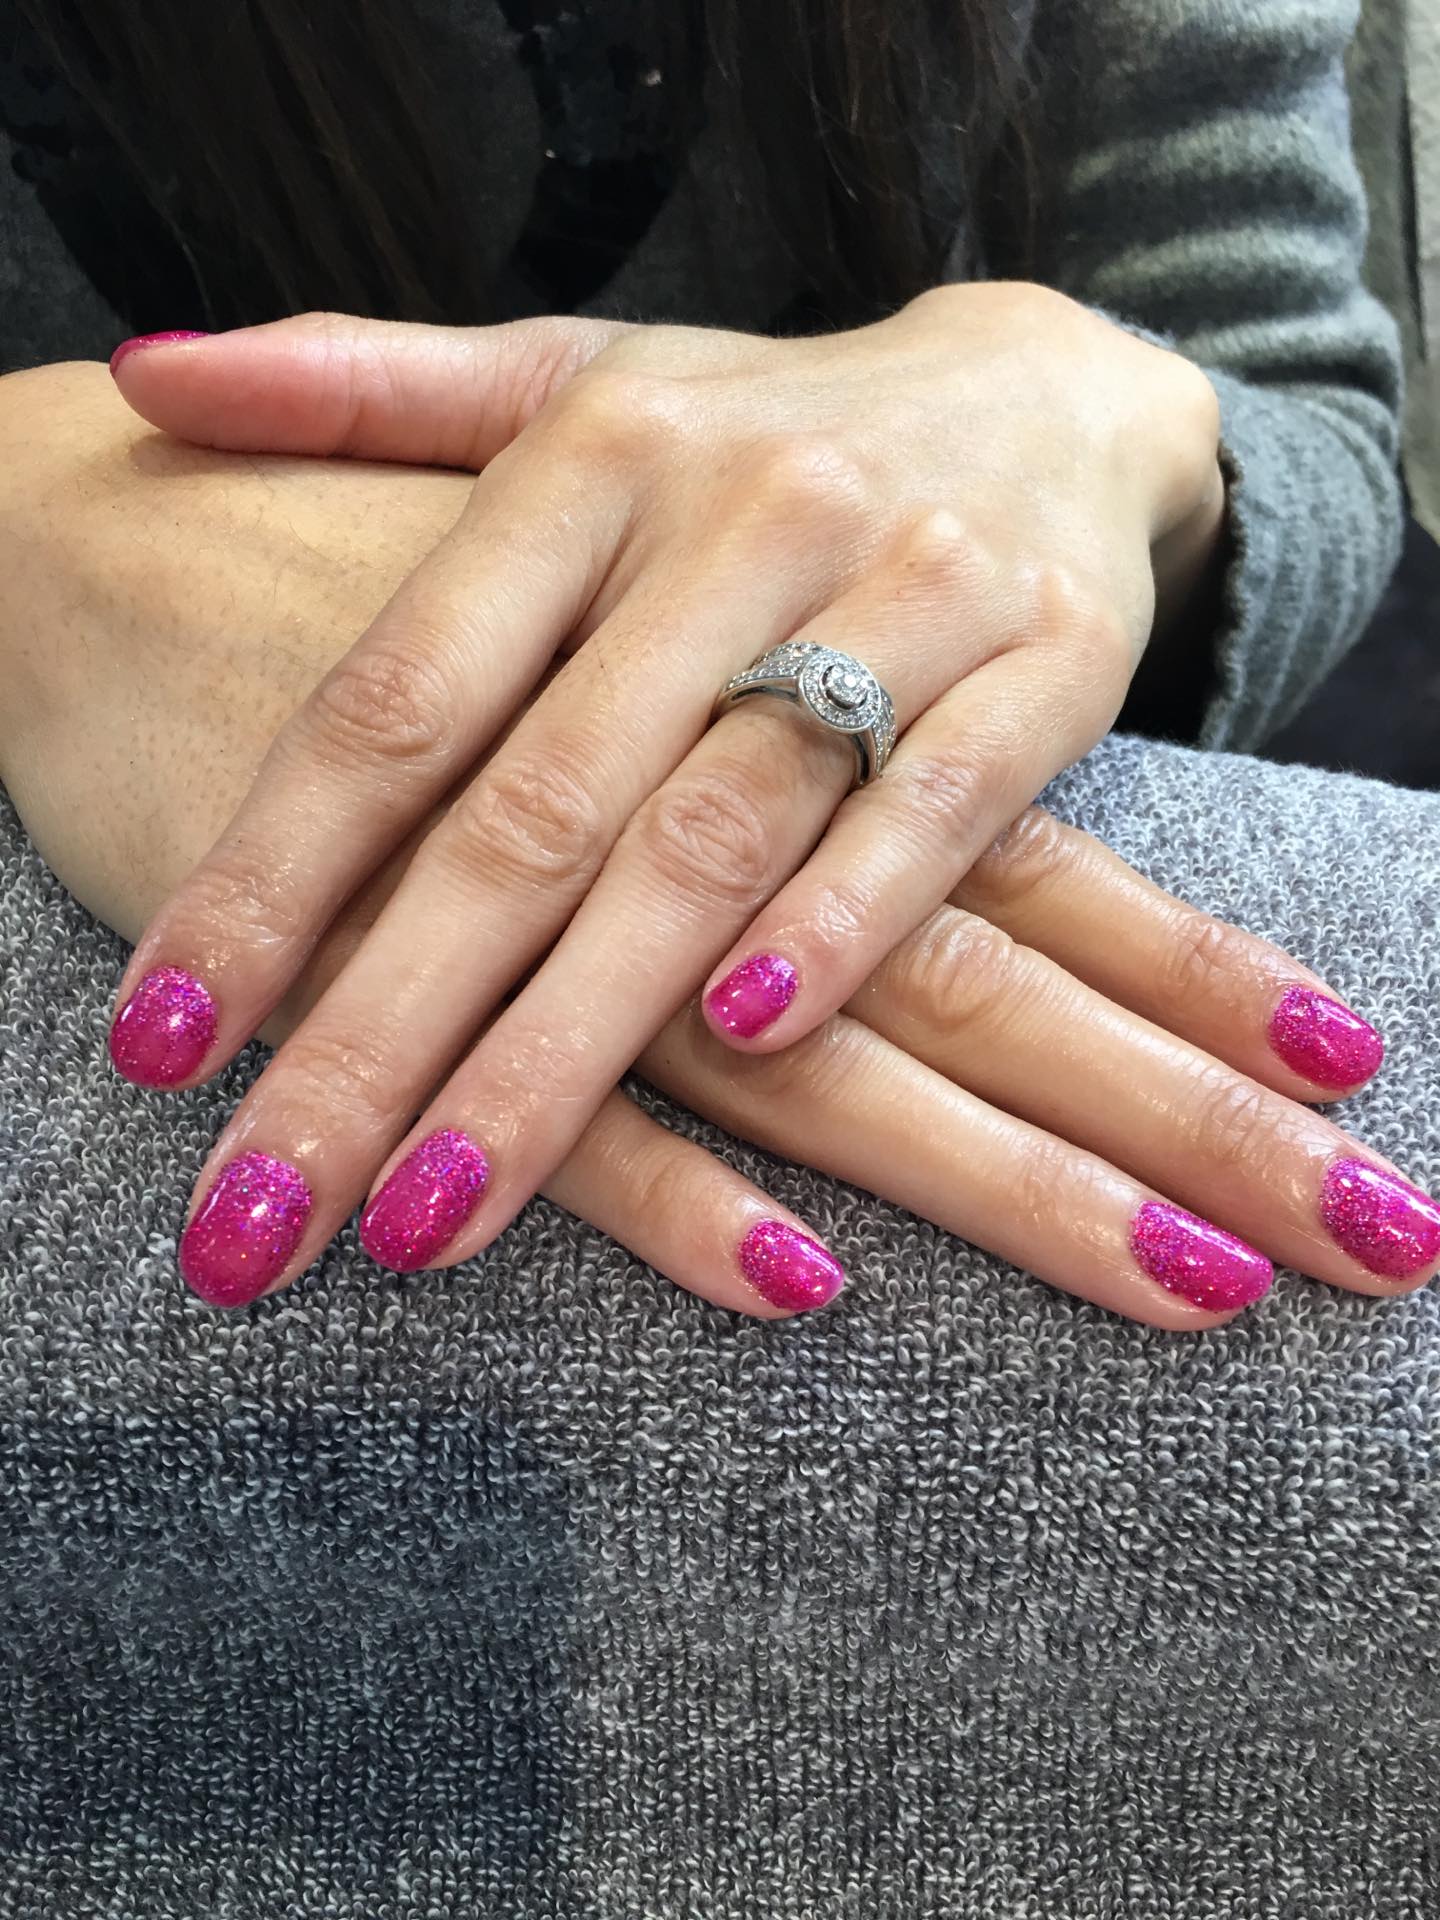 Shellac Vs Gel Nails, How Is One Better If They're The Same Manicure? |  BeautyStack